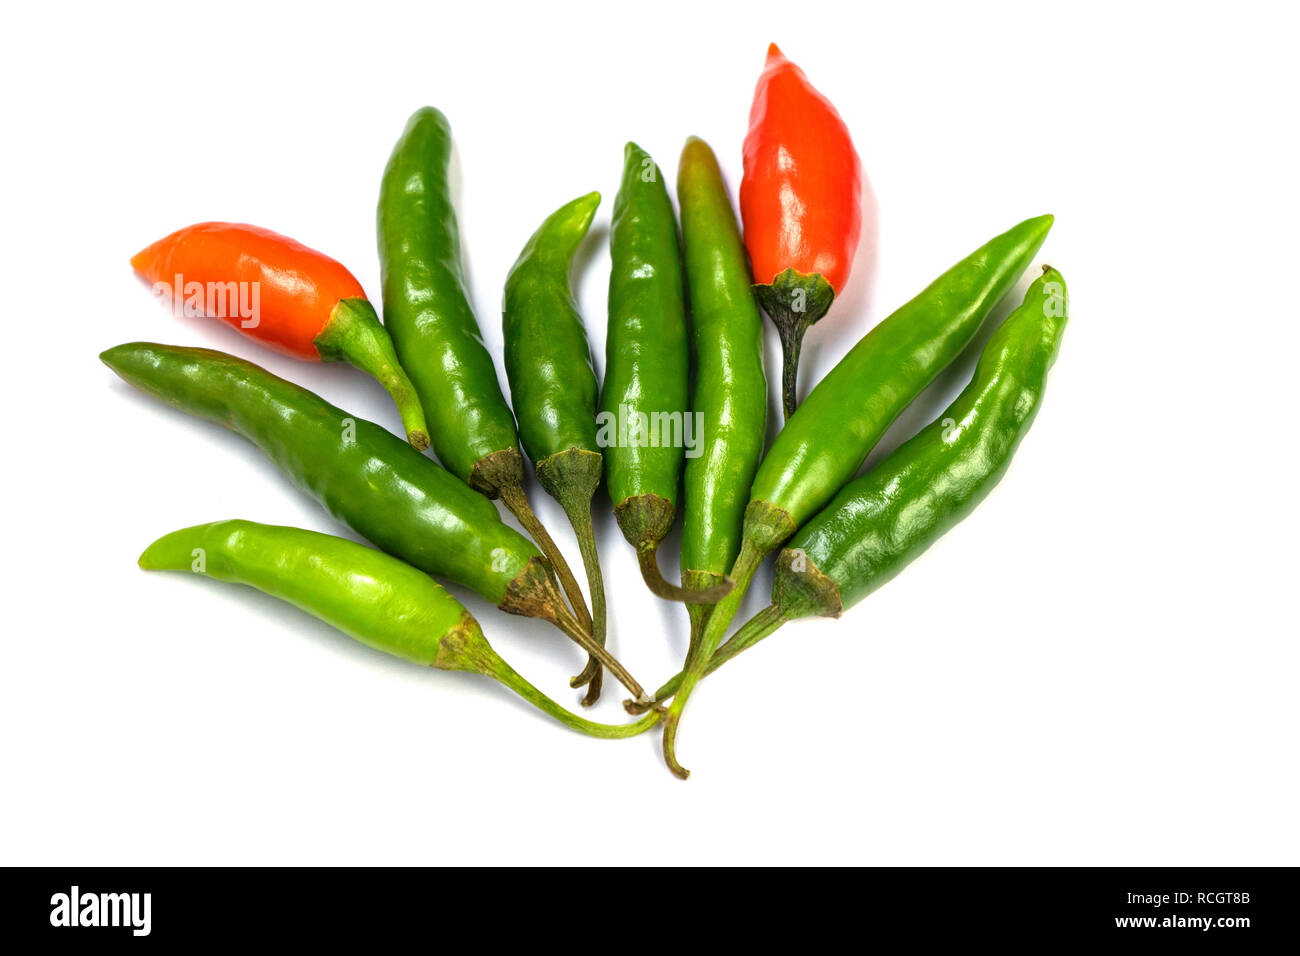 Red and green chili pepper isolated on white background Stock Photo